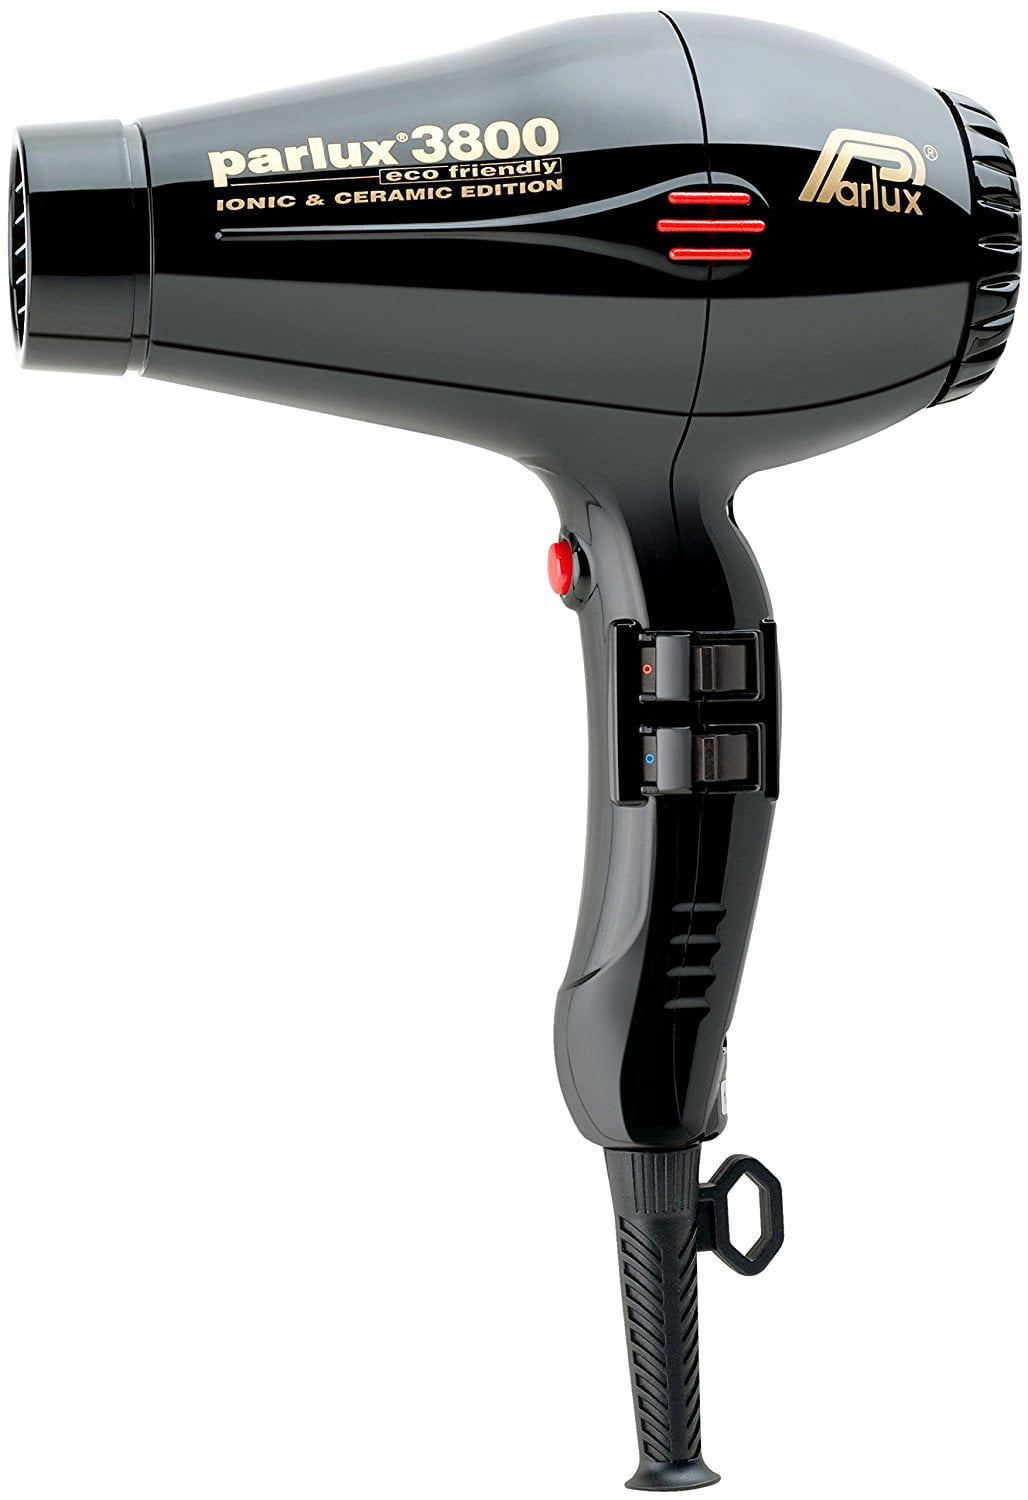 Parlux 3800 Ionic and Ceramic Professional Hair Dryer Black 